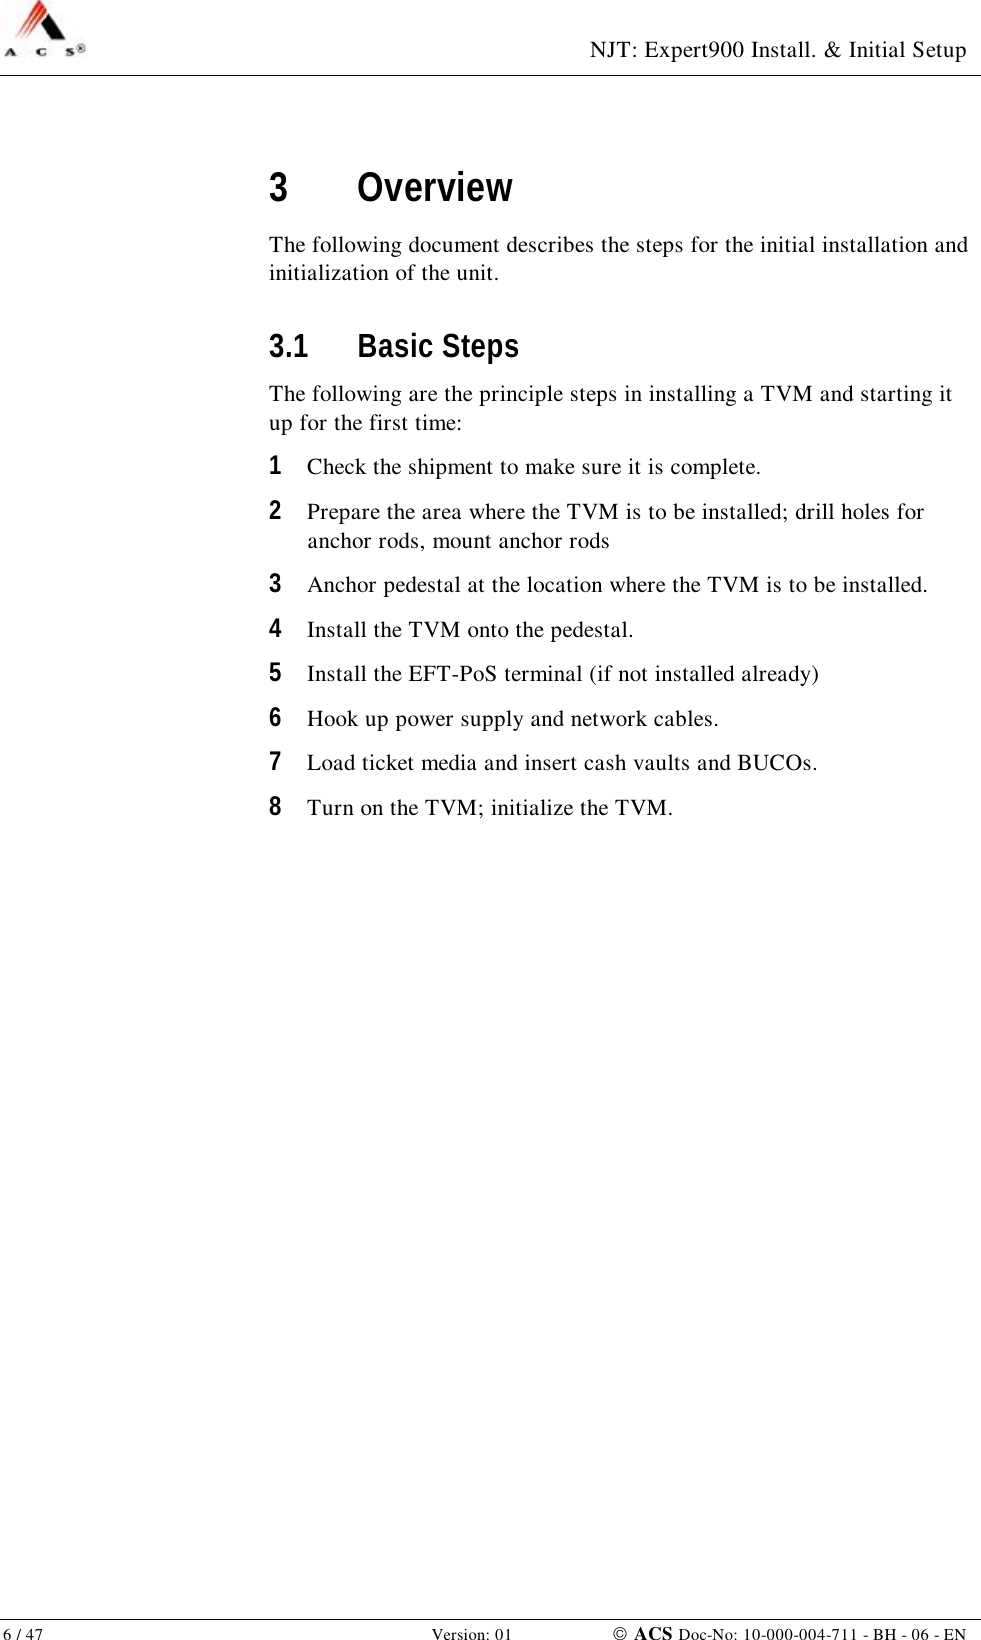  NJT: Expert900 Install. &amp; Initial Setup 6 / 47   Version: 01    ACS Doc-No: 10-000-004-711 - BH - 06 - EN 3 Overview The following document describes the steps for the initial installation and initialization of the unit. 3.1 Basic Steps The following are the principle steps in installing a TVM and starting it up for the first time: 1  Check the shipment to make sure it is complete. 2  Prepare the area where the TVM is to be installed; drill holes for anchor rods, mount anchor rods 3  Anchor pedestal at the location where the TVM is to be installed. 4  Install the TVM onto the pedestal. 5  Install the EFT-PoS terminal (if not installed already) 6  Hook up power supply and network cables. 7  Load ticket media and insert cash vaults and BUCOs. 8  Turn on the TVM; initialize the TVM. 